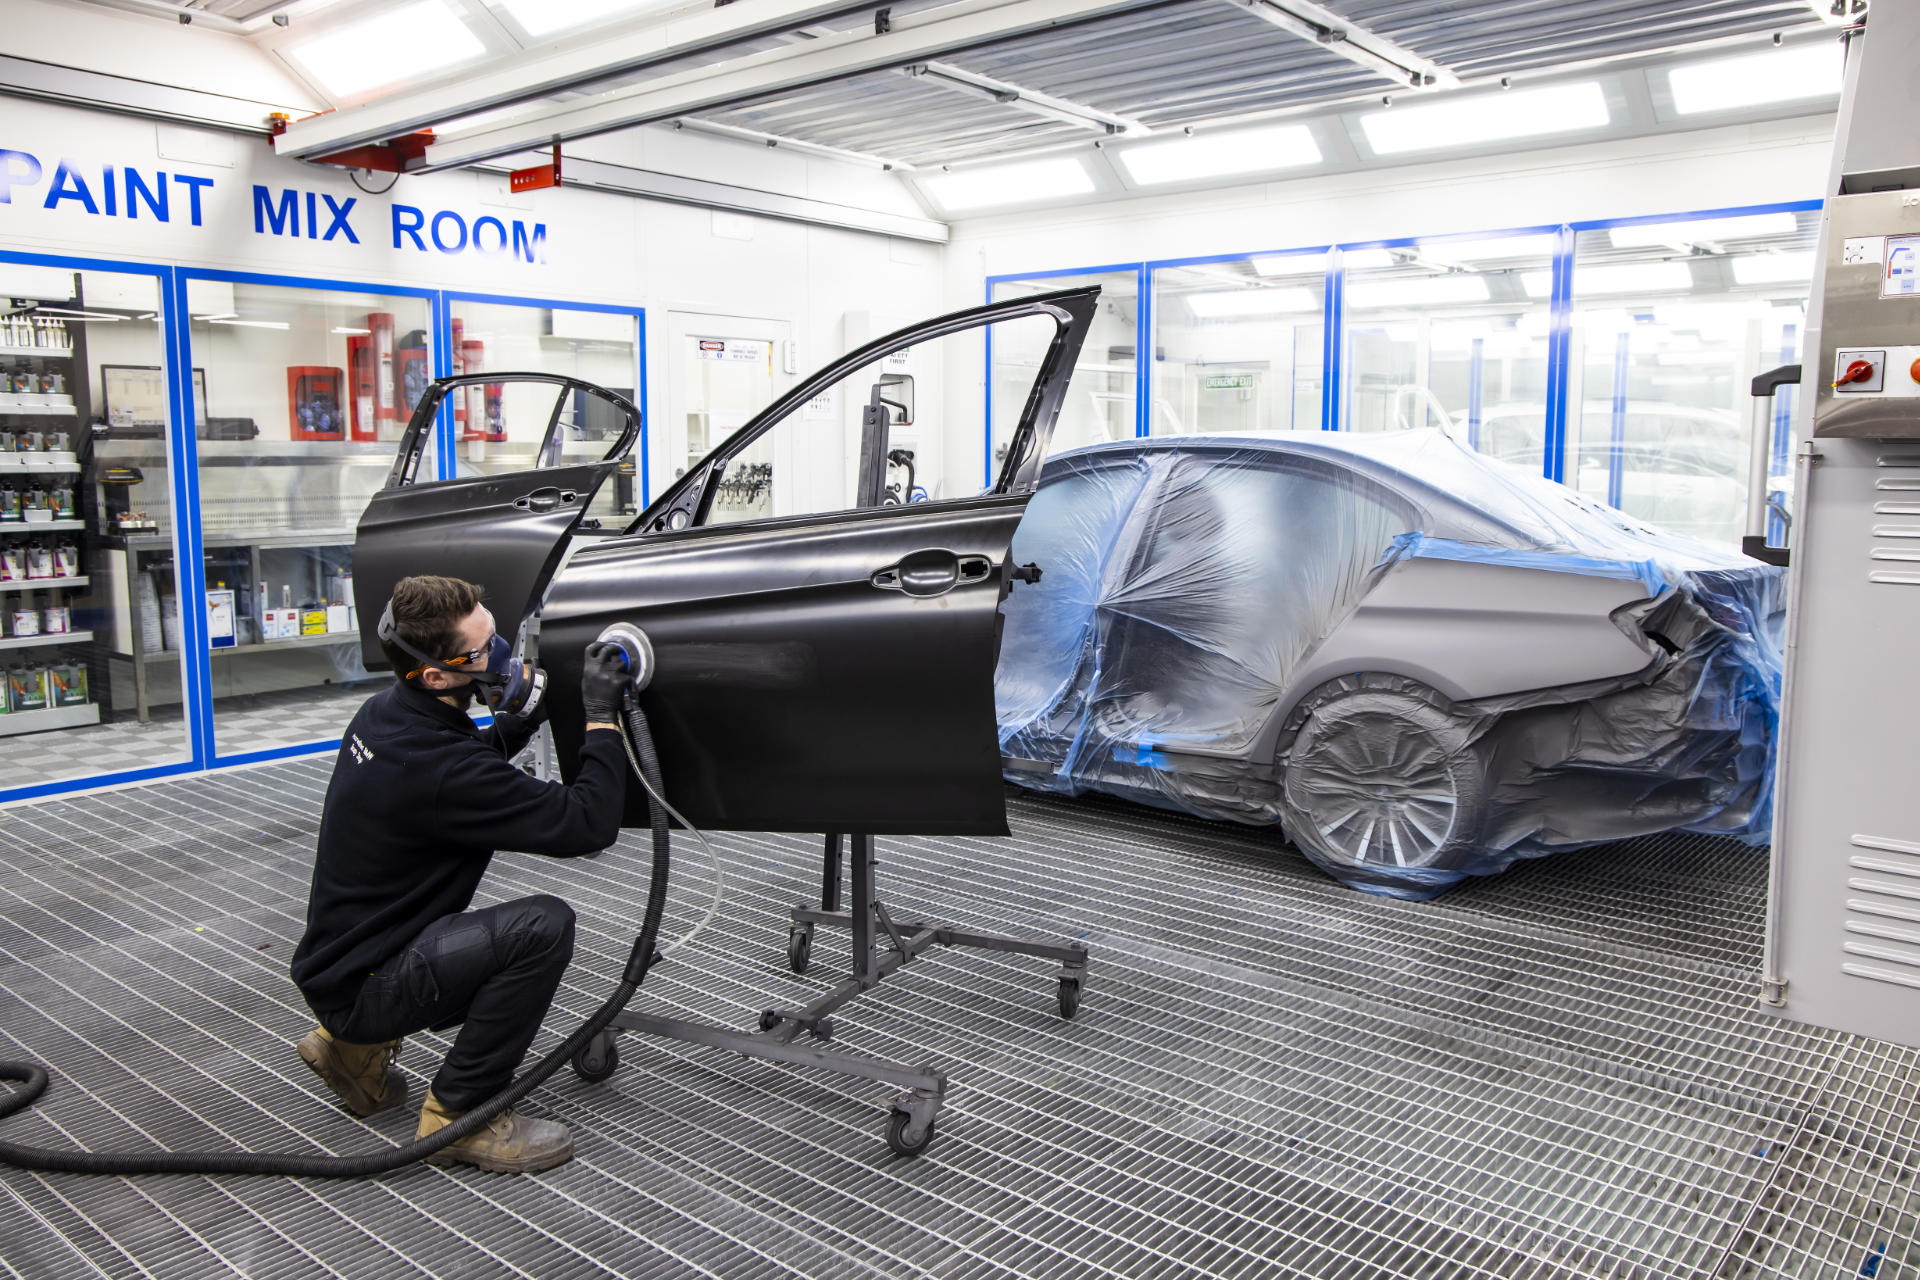 North Shore BMW Opens “State-Of-The-Art” Accredited BMW Bodyshop